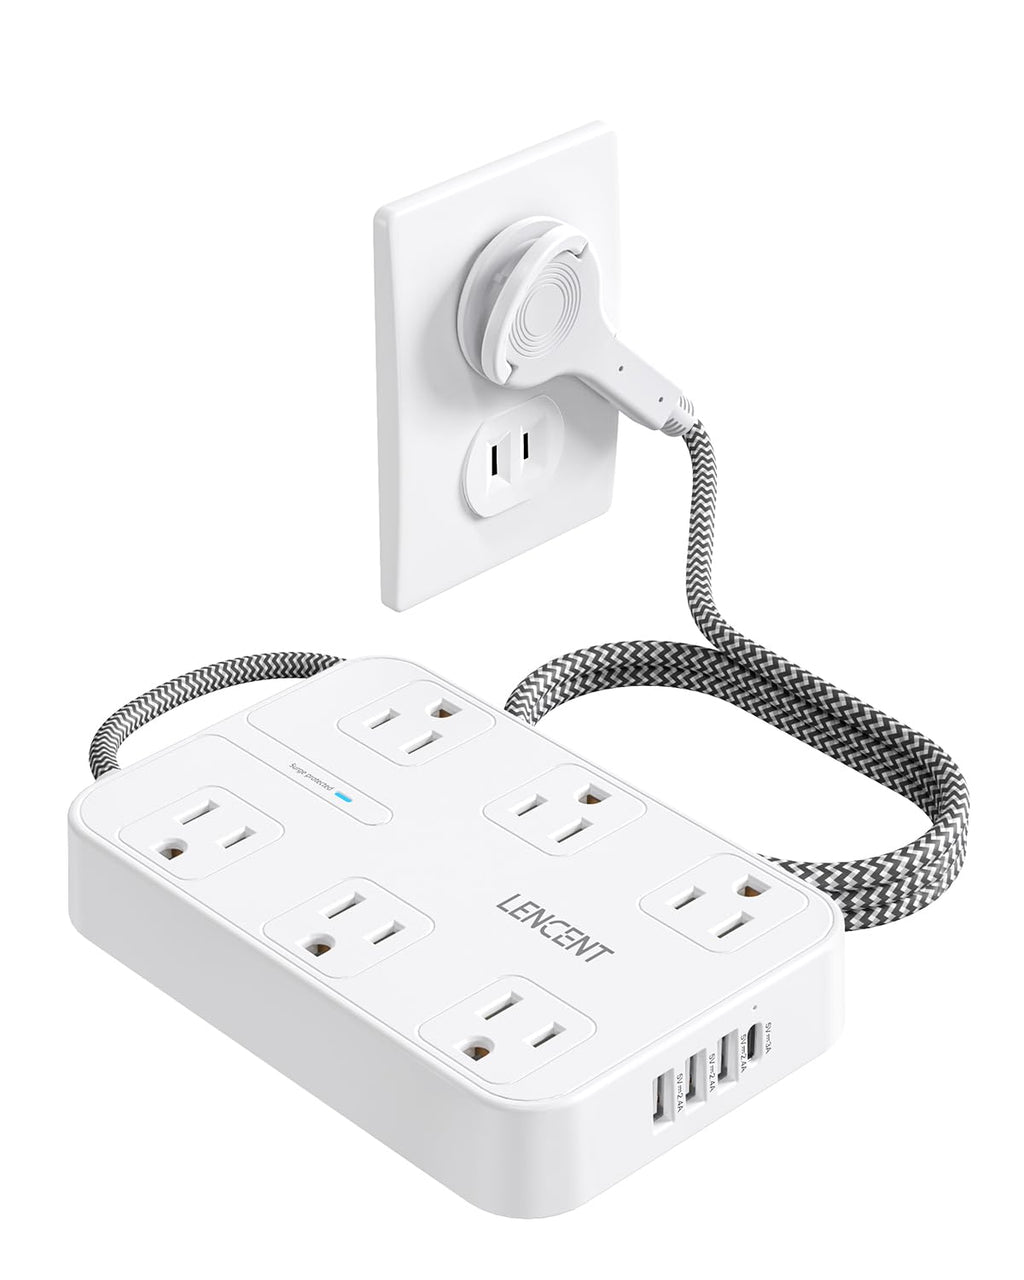 [Australia - AusPower] - LENCENT 2 Prong Power Strip, 3 to 2 Prong Outlet Adapter, Two Prong Surge Protector, 6ft Braided Extension Cord with Thin Flat Polarized Plug, 6 AC&4 USB(1 Type-C), Wall Mount for Non-Grounded Outlet 